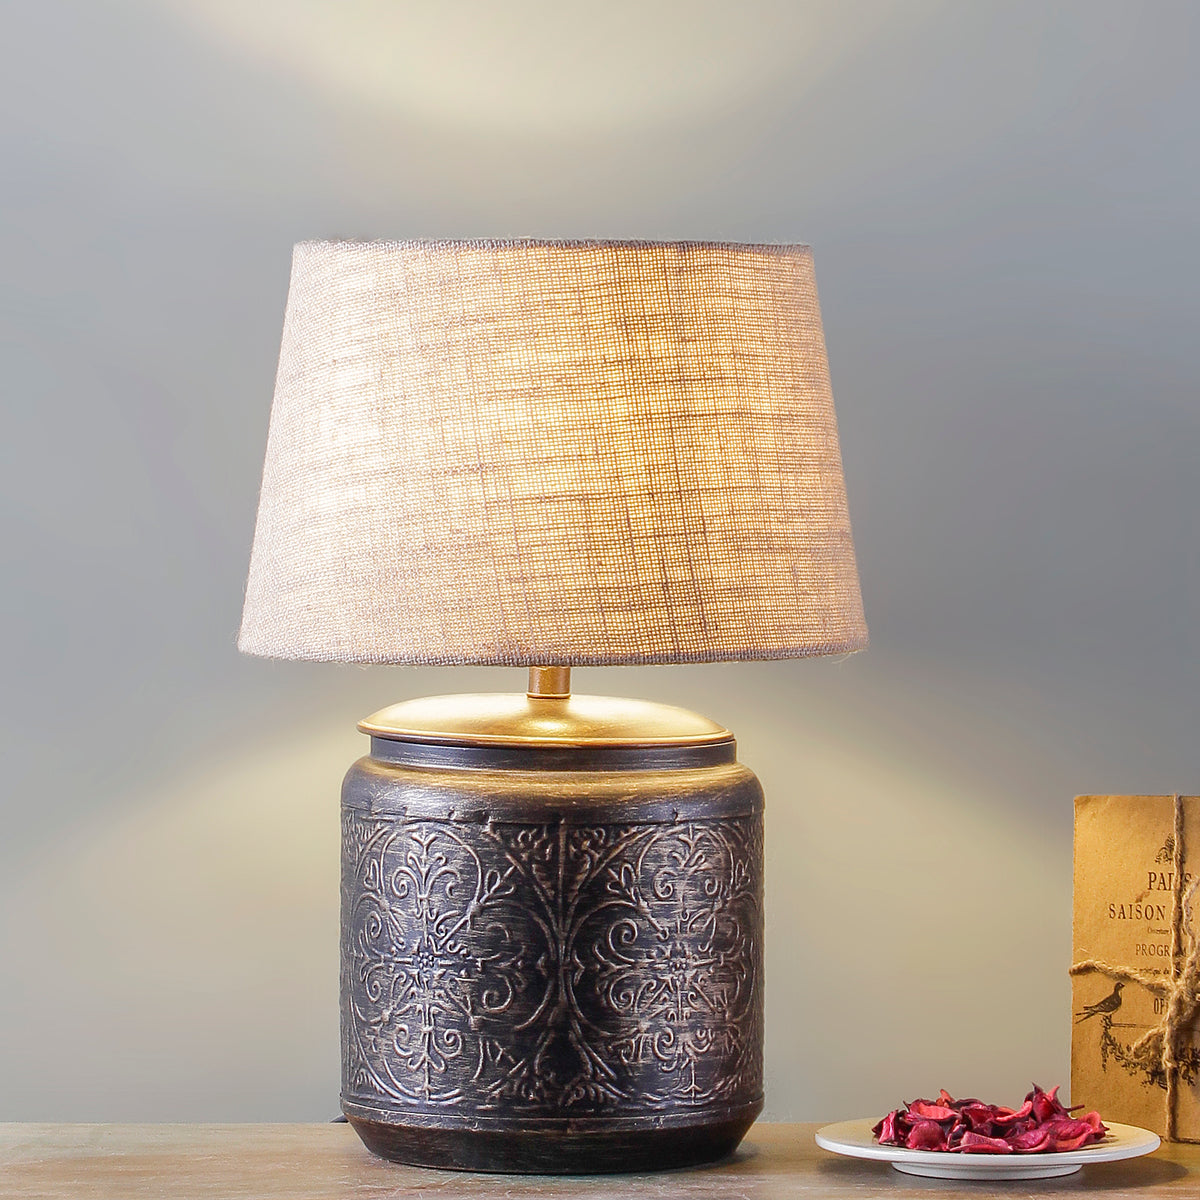 Creote Table Lamp online